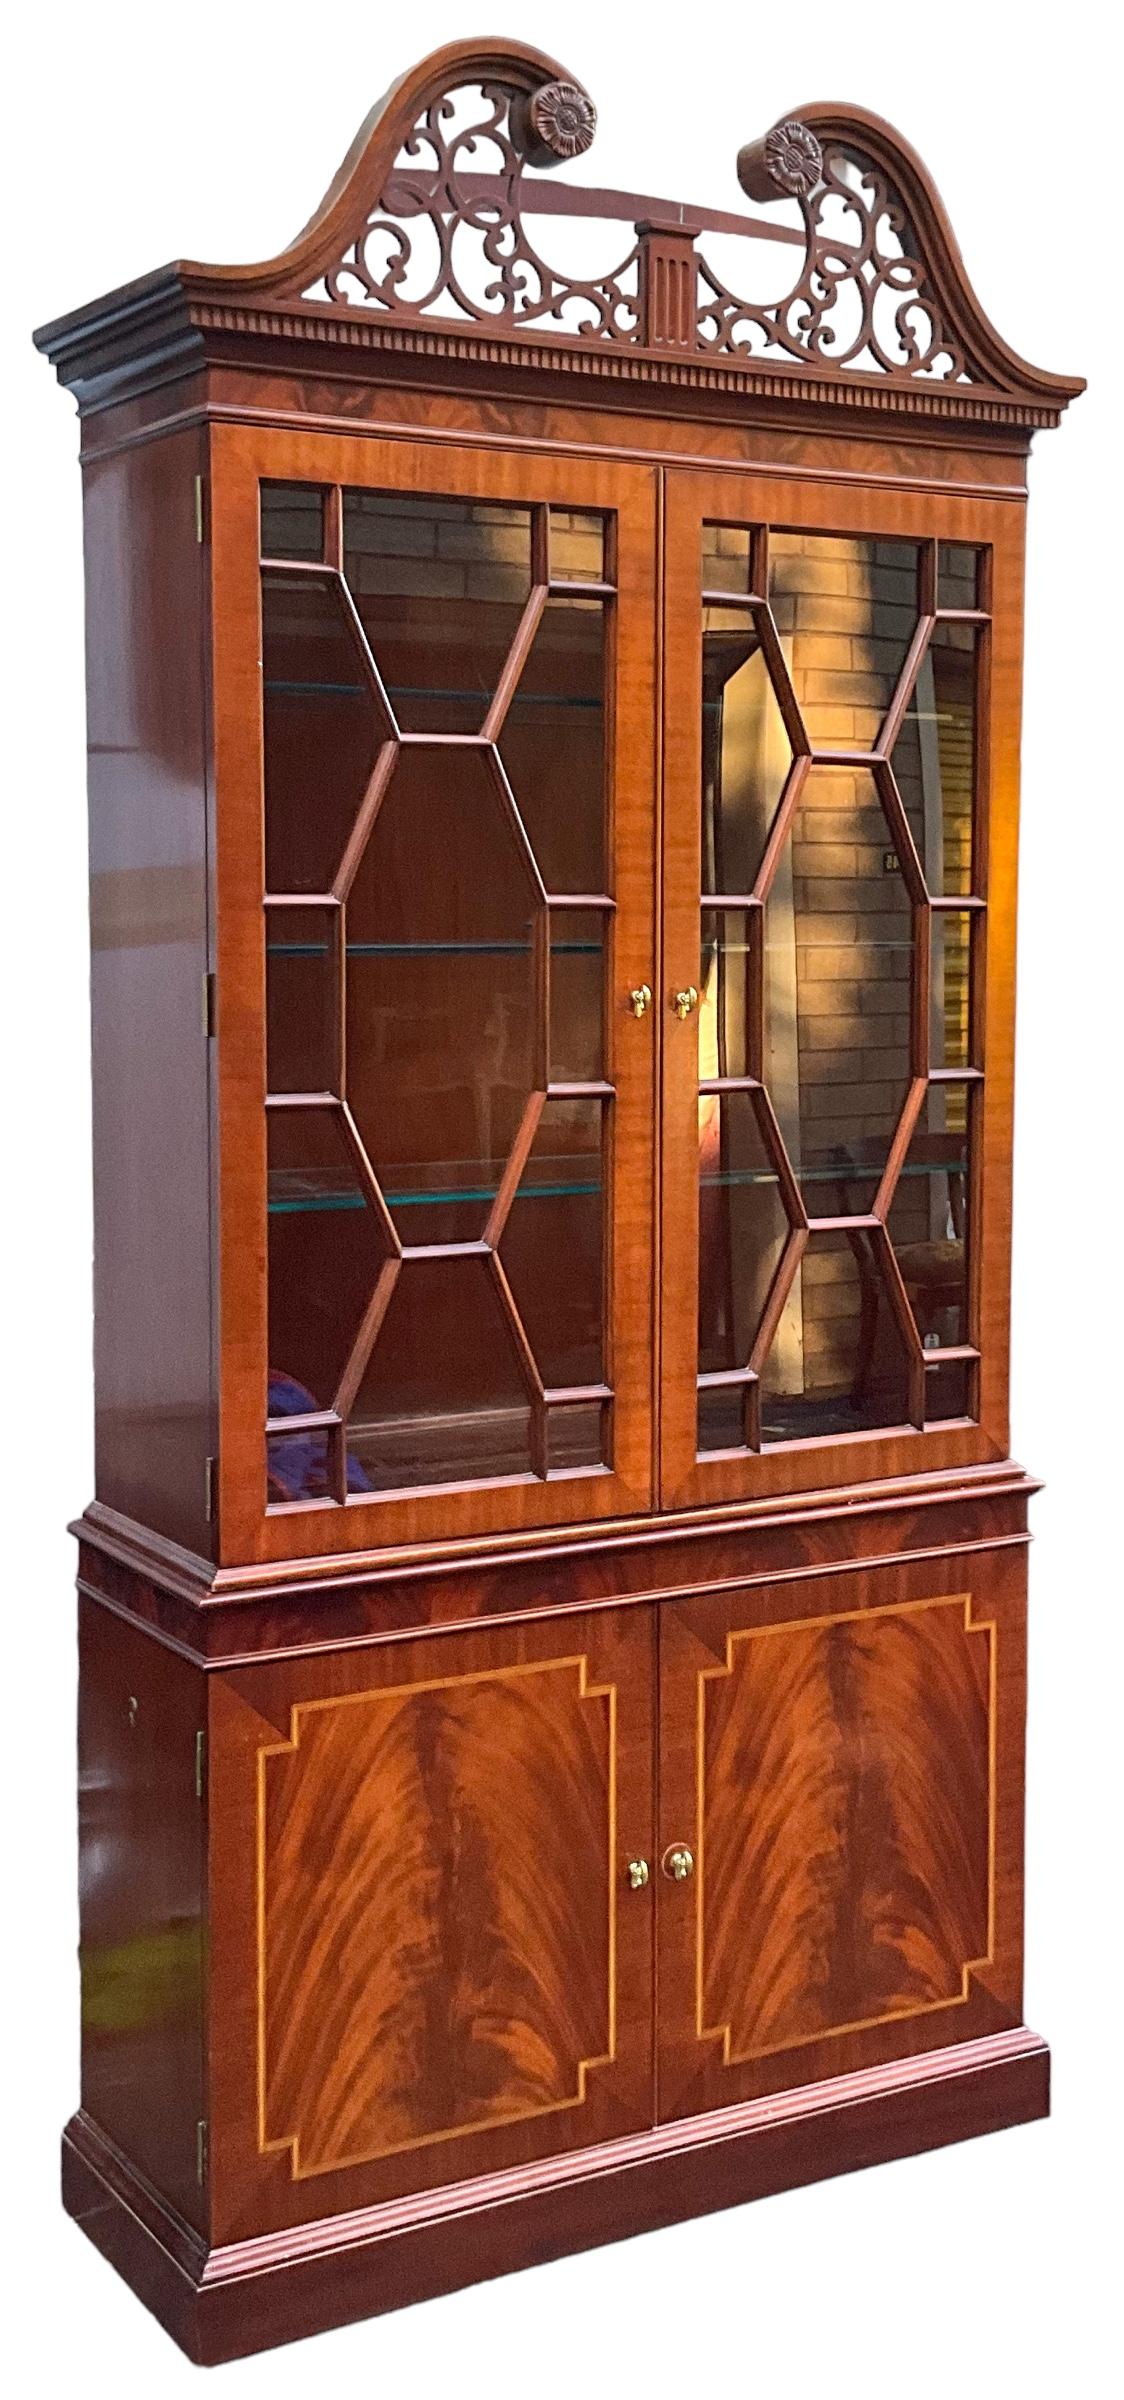 This is a beautiful pair of Chinese Chippendale style flame mahogany display cabinets by Councill Craftsmen. They have interior glass shelves that are illuminated by two lights. The base has a single wooden shelf. They are marked and date to the